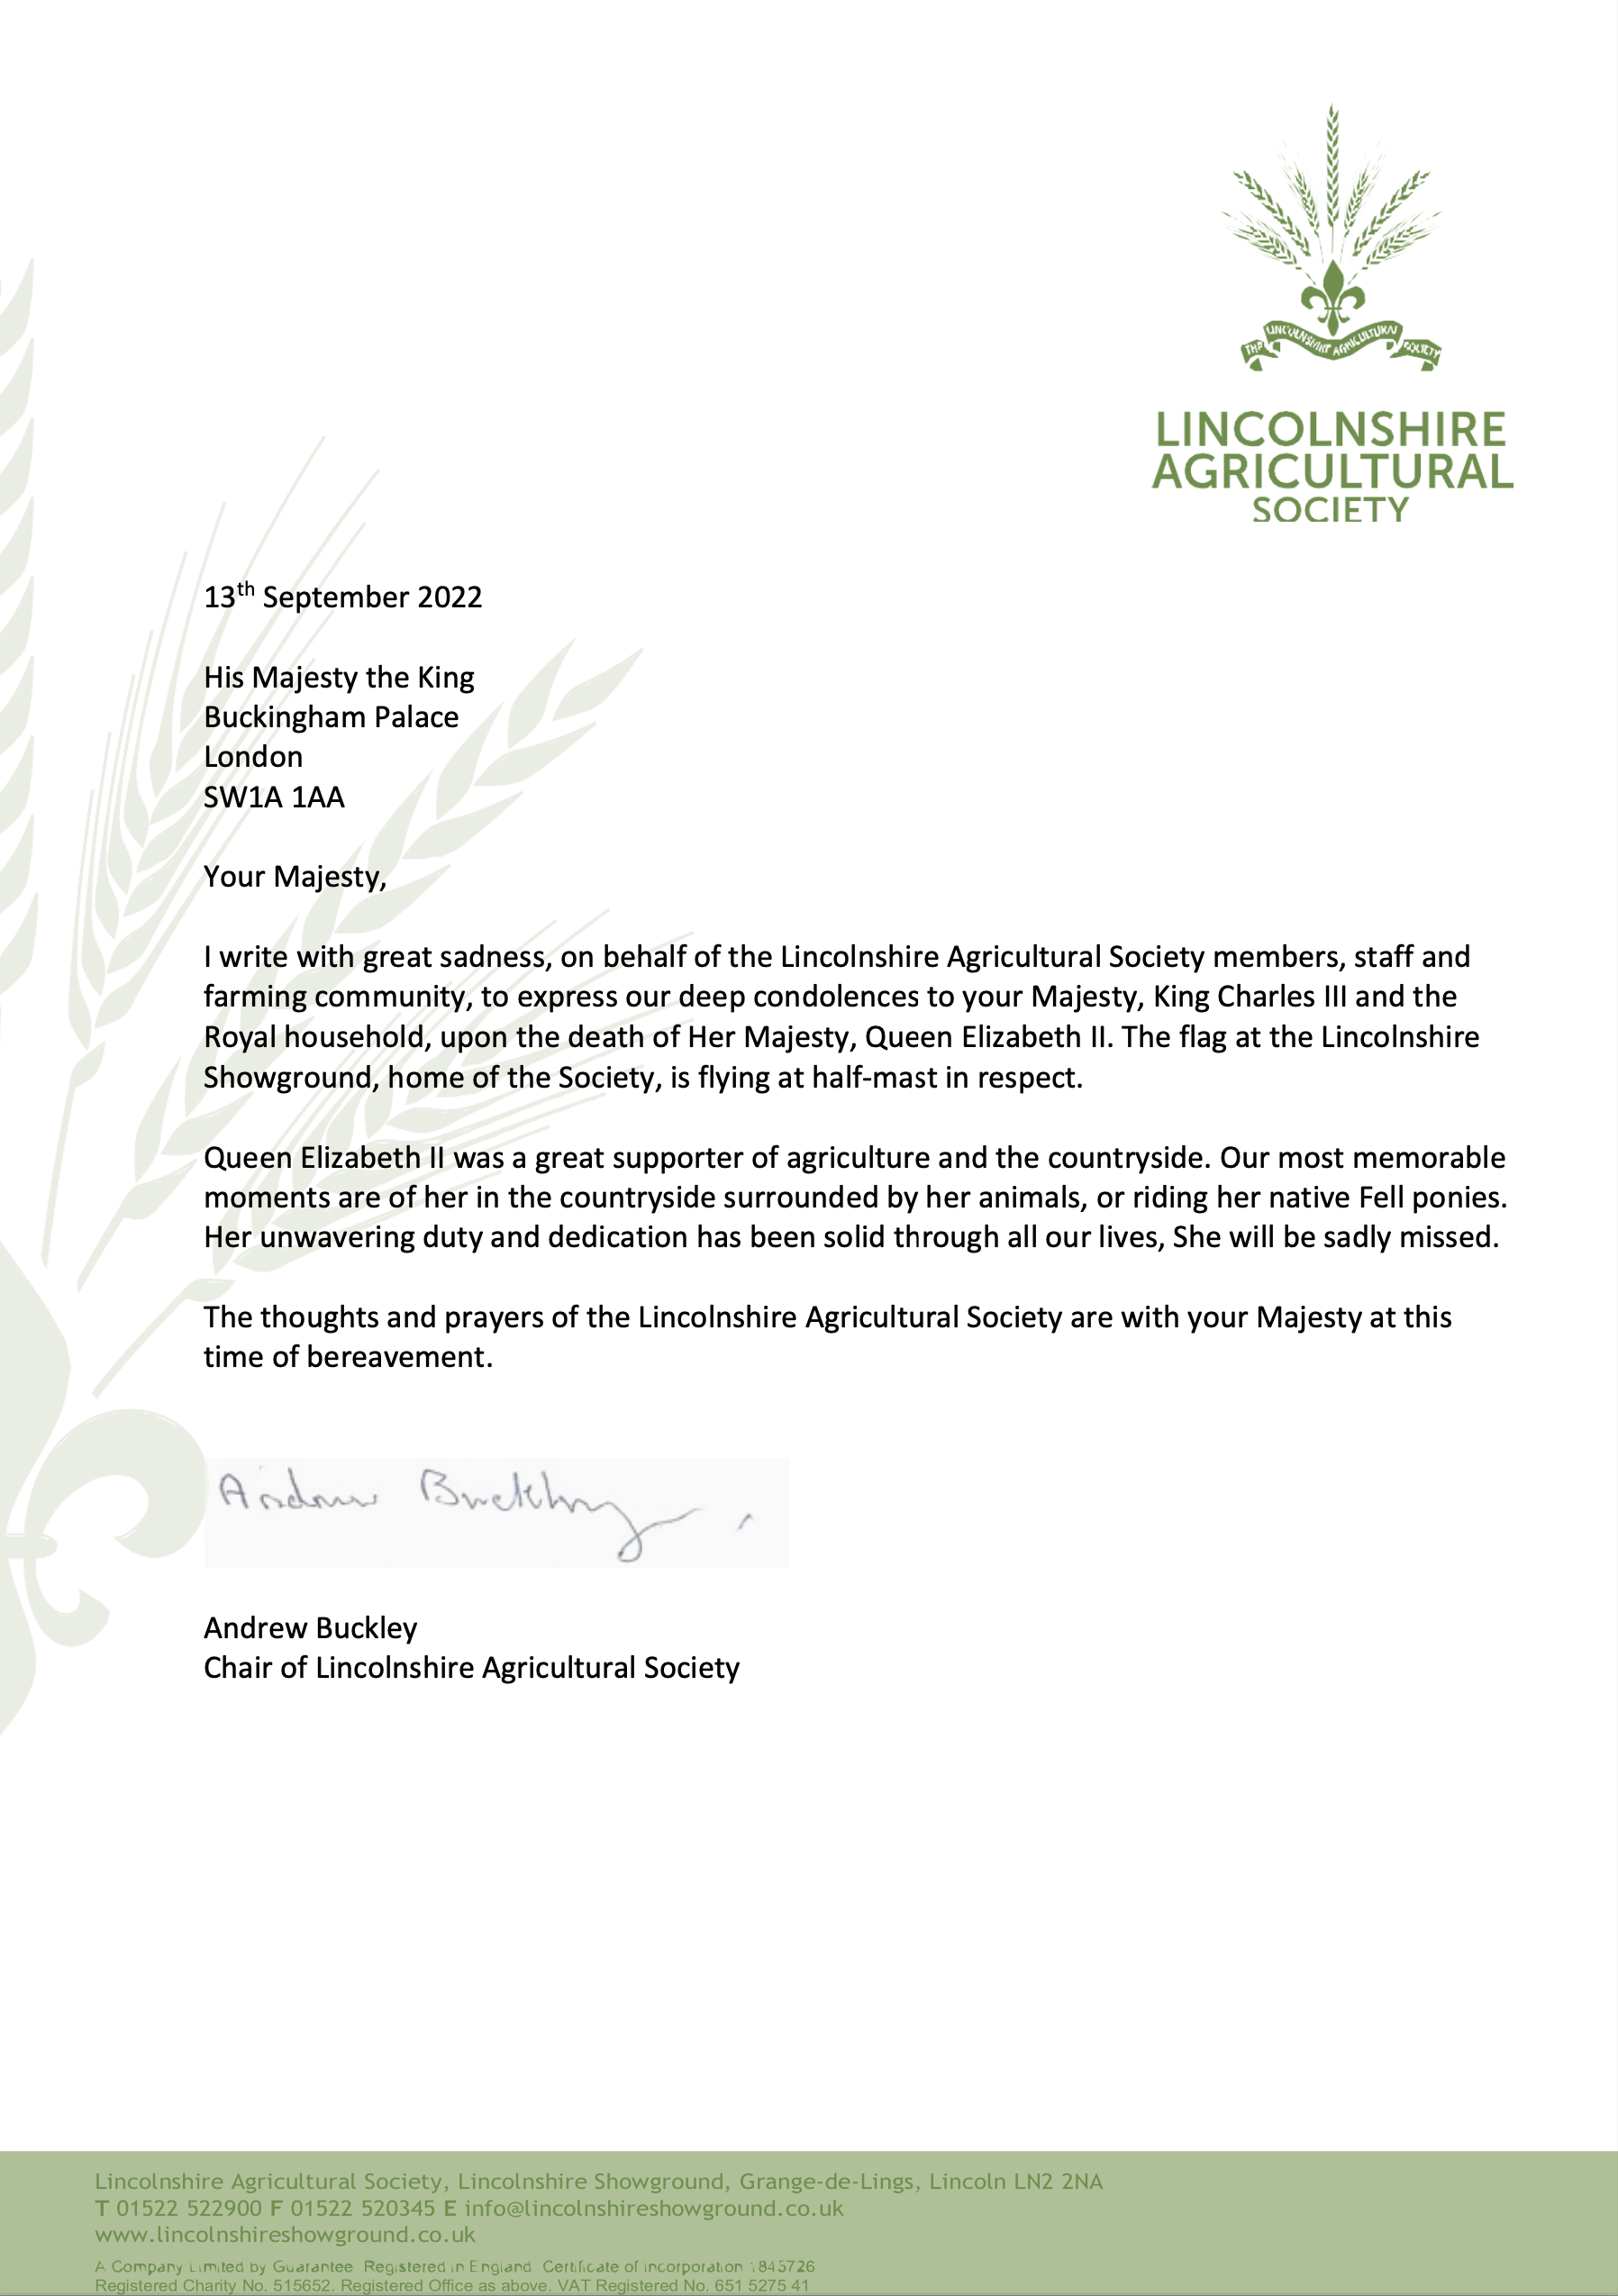 Letter to His Majesty the King